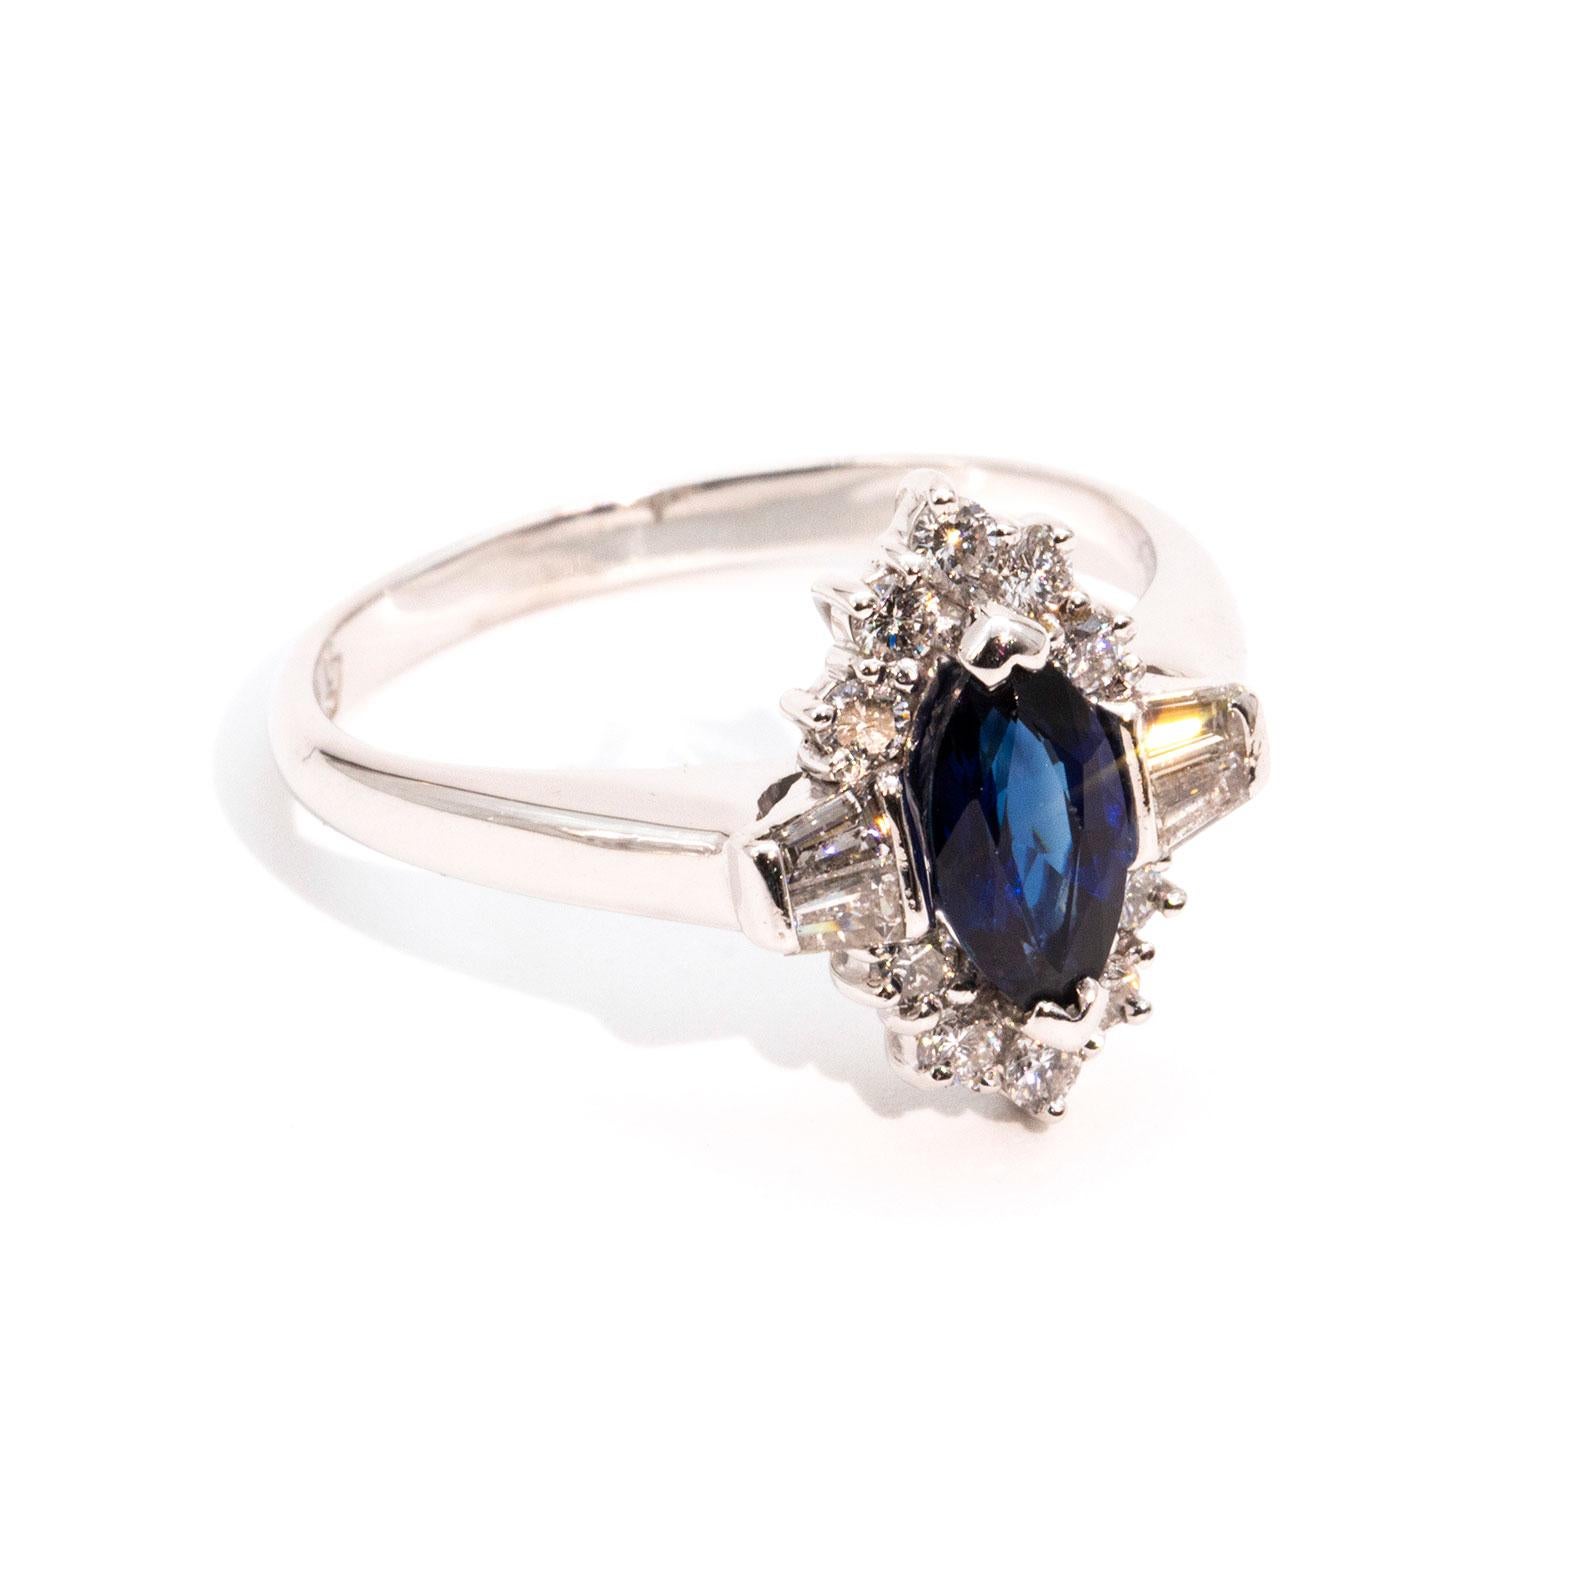 This carefully handmade, art deco inspired, uniquely original ring is forged in 18ct white gold and features a beautiful natural Australian blue marquise 0.75 carat sapphire that is flanked by four beautiful tapered diamonds and is surrounded by ten